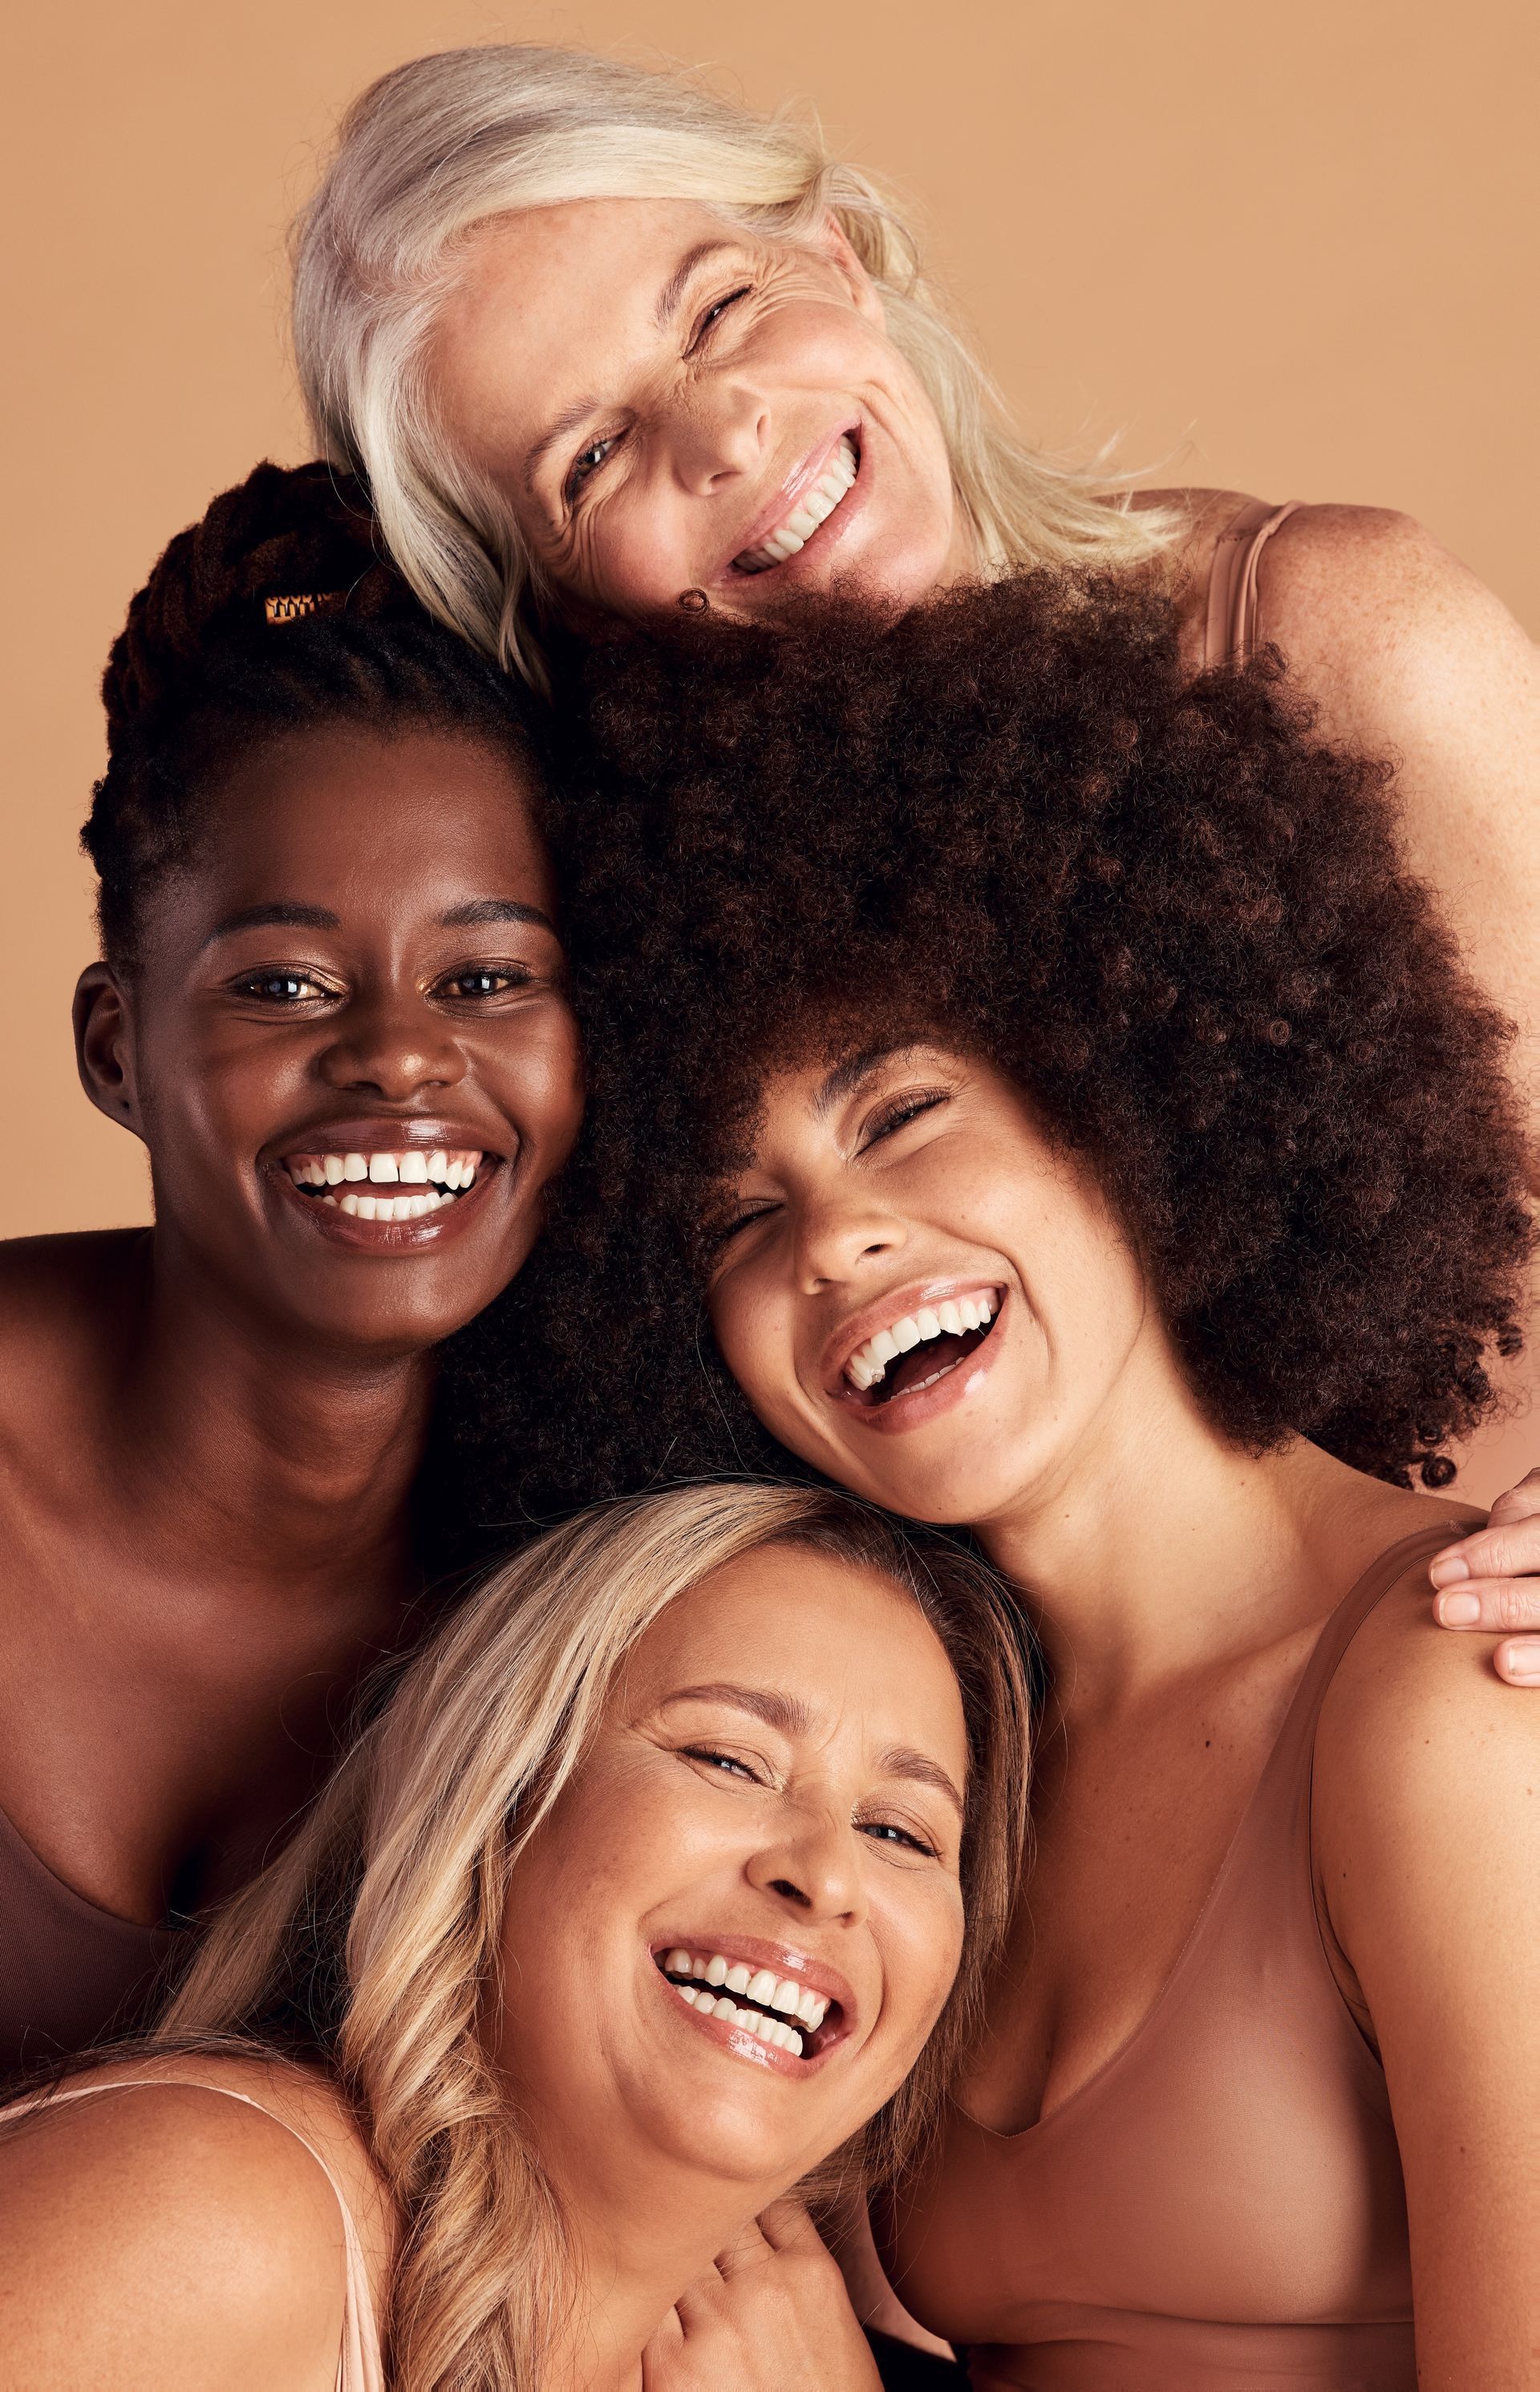 A group of women are posing for a picture together and smiling.